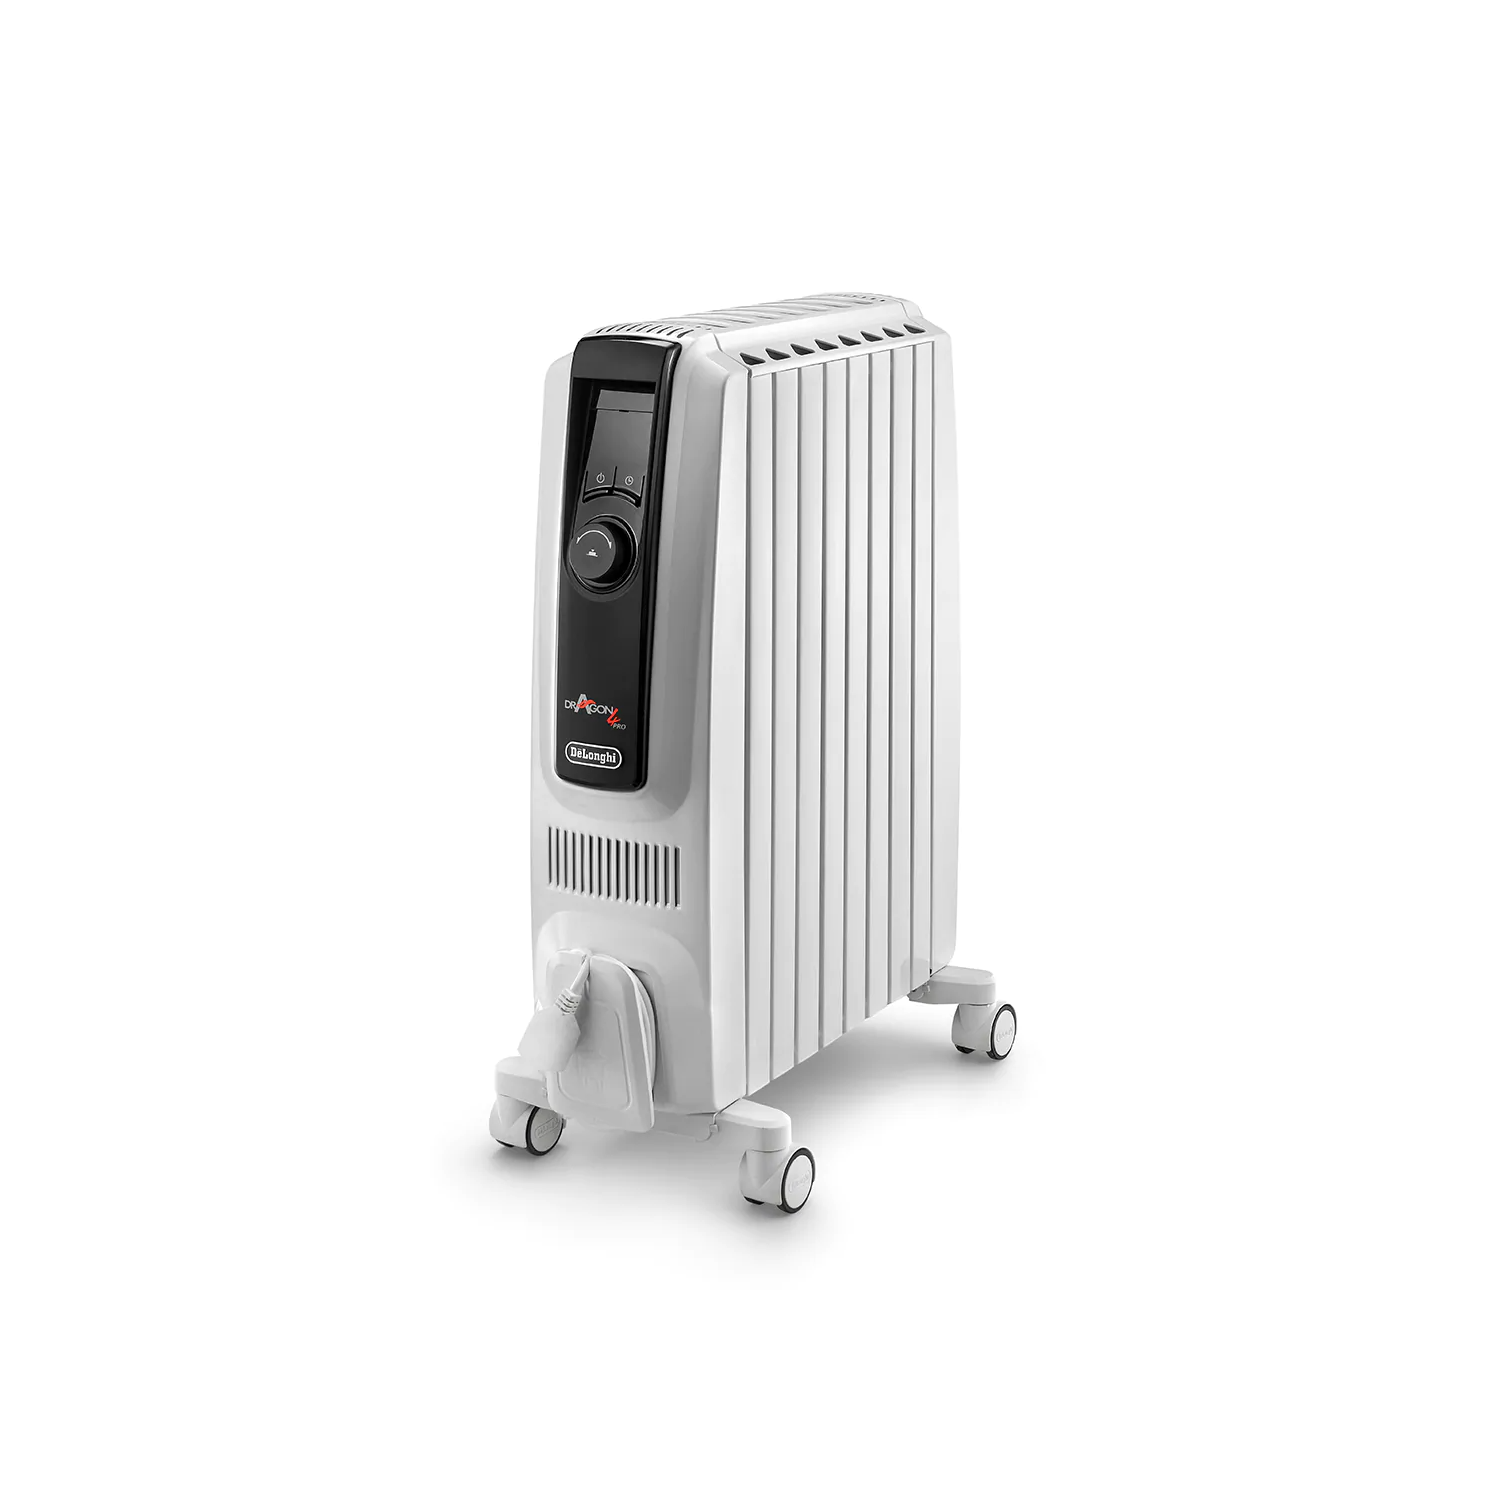 DeLonghi Dragon 4 2kW Oil Filled Radiator 8 Fin with Digital Display & Increased Radiant Surface - 1